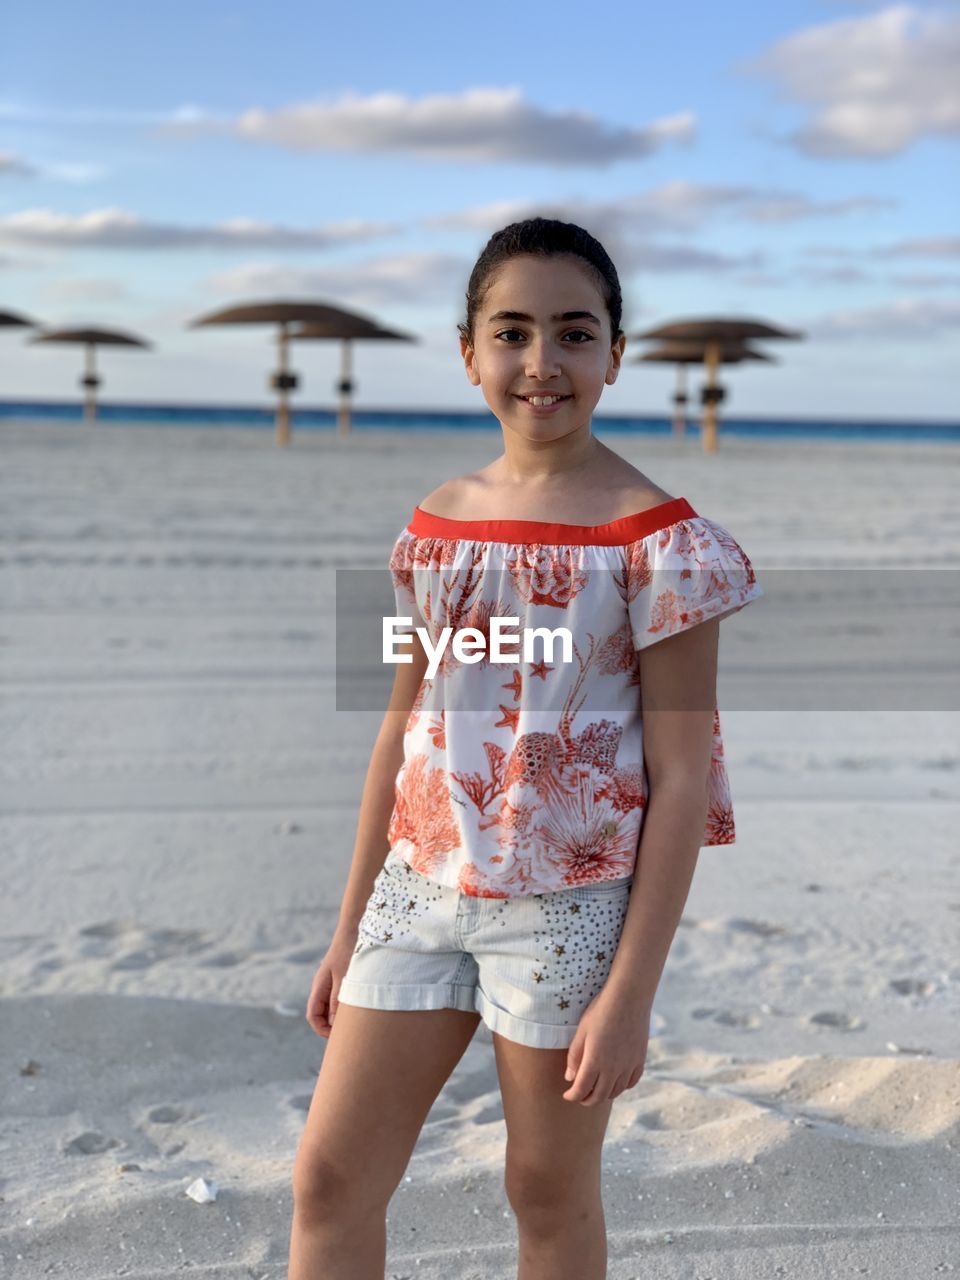 beach, one person, vacation, water, sea, land, portrait, looking at camera, childhood, child, spring, front view, standing, sand, sky, nature, smiling, day, holiday, casual clothing, leisure activity, trip, emotion, blue, three quarter length, clothing, happiness, women, female, dress, photo shoot, summer, outdoors, focus on foreground, full length, person, lifestyles, fashion, sunlight, cloud, travel destinations, travel